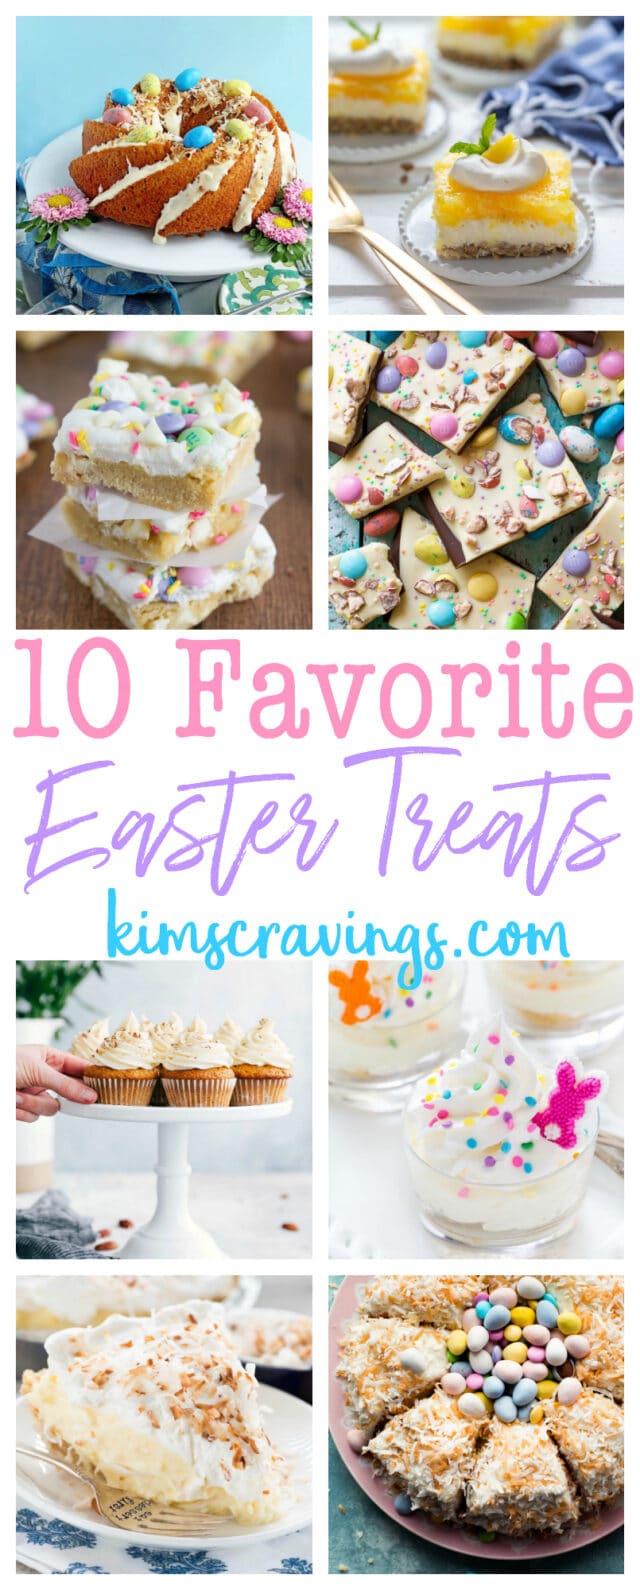 Spring has sprung and Easter Sunday is right around the corner. Today I’ve got 10 favorite Easter treats to help complete your Easter menu. Not only are all of these recipes perfect for Easter serving, they are desserts you'll want to enjoy all spring long.